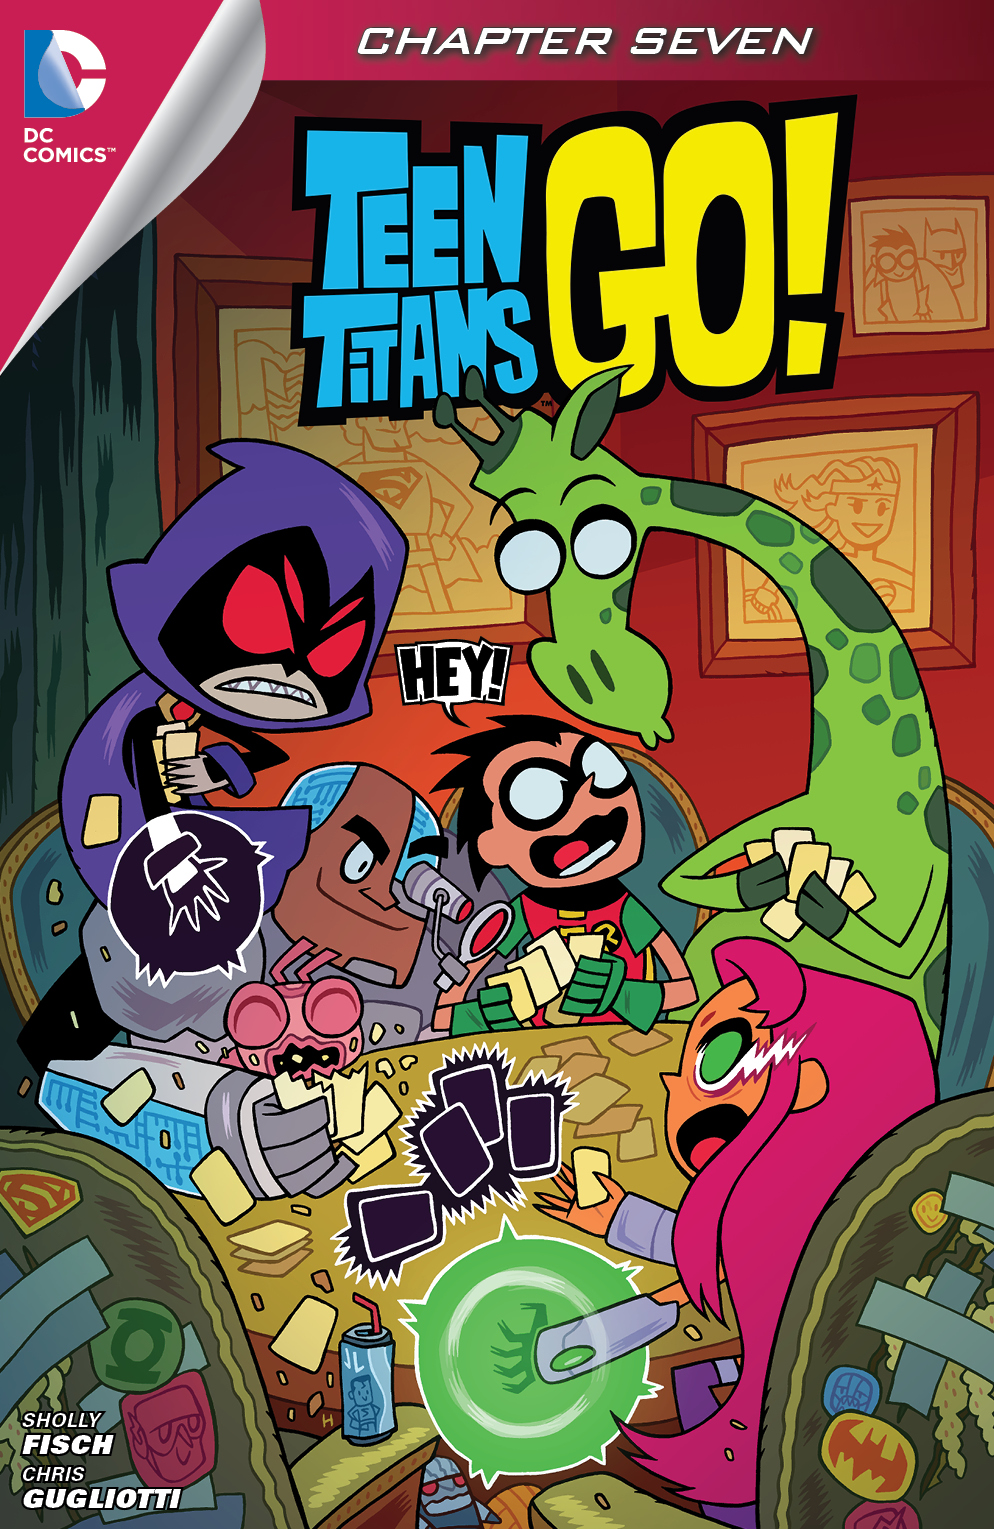 Teen Titans Go! (2013-) #7 preview images